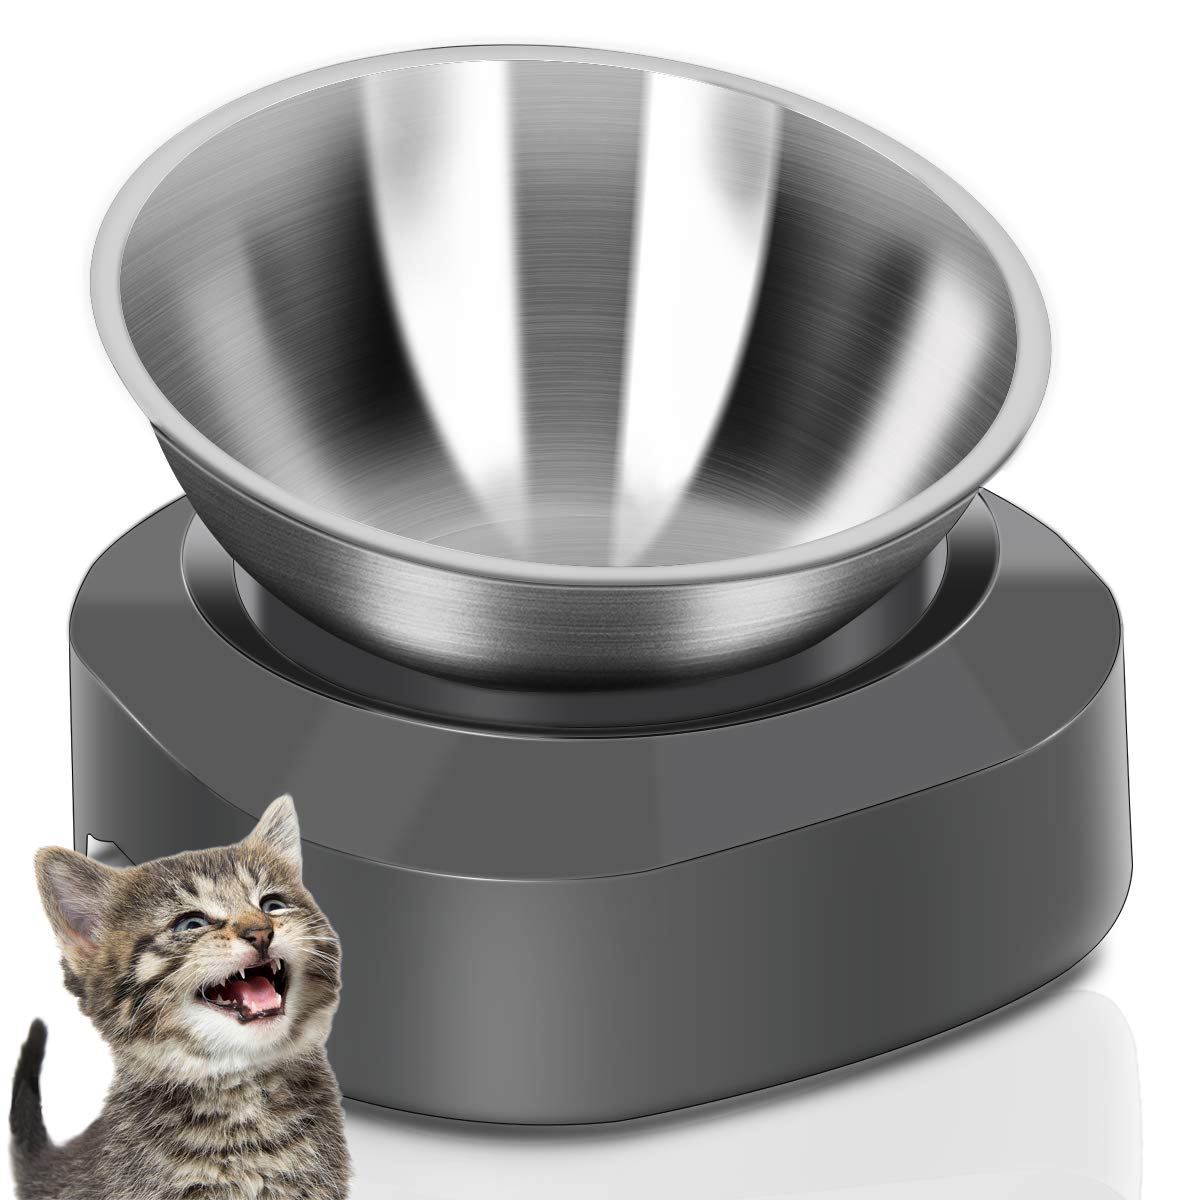 AYADA Raised Cat Food Bowl, Stainless Steel Cat Dish